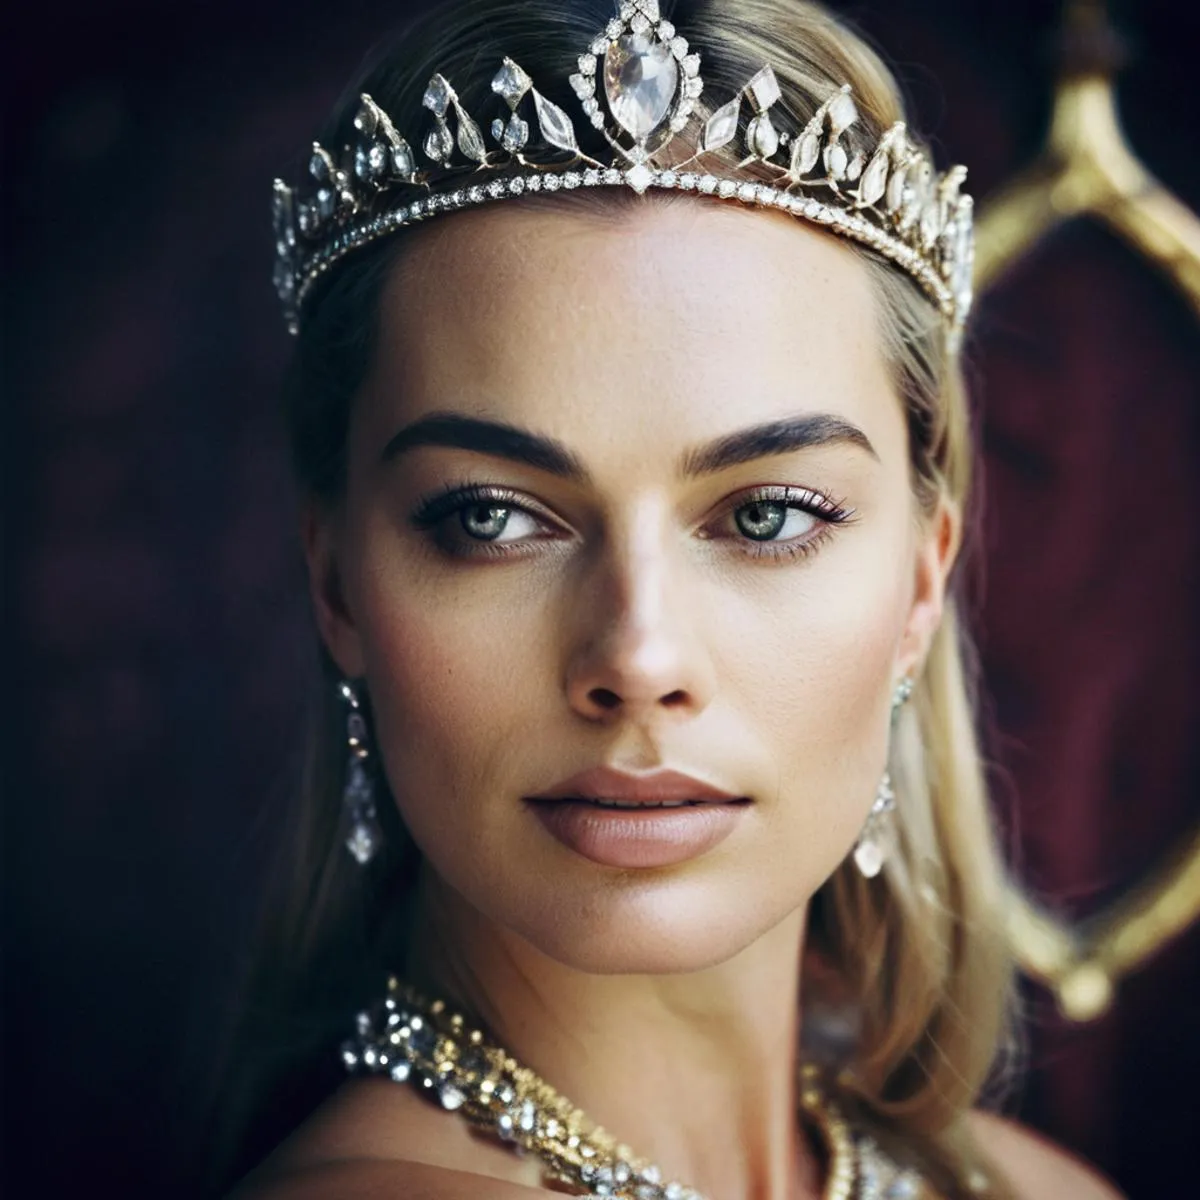 An AI generated image using stable diffusion featuring a close-up of an elegant woman wearing a delicate princess crown adorned with gemstones and elegant earrings, with a subtle background.